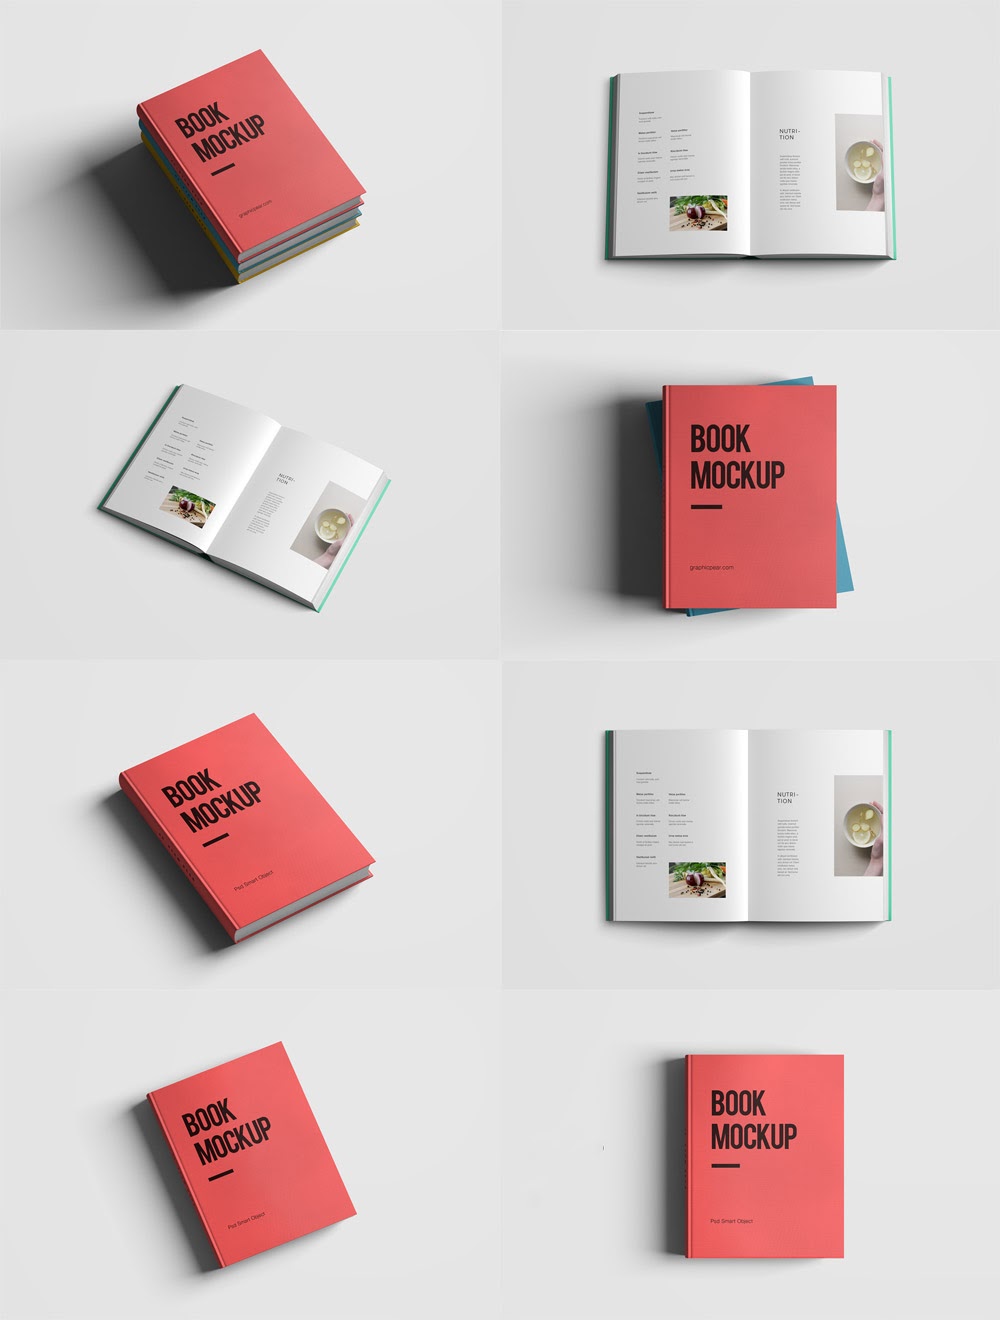 Download Book Mockup Slipcase Edition Download Free / Metallic Covered Books Mockup In Stationery Mockups ...